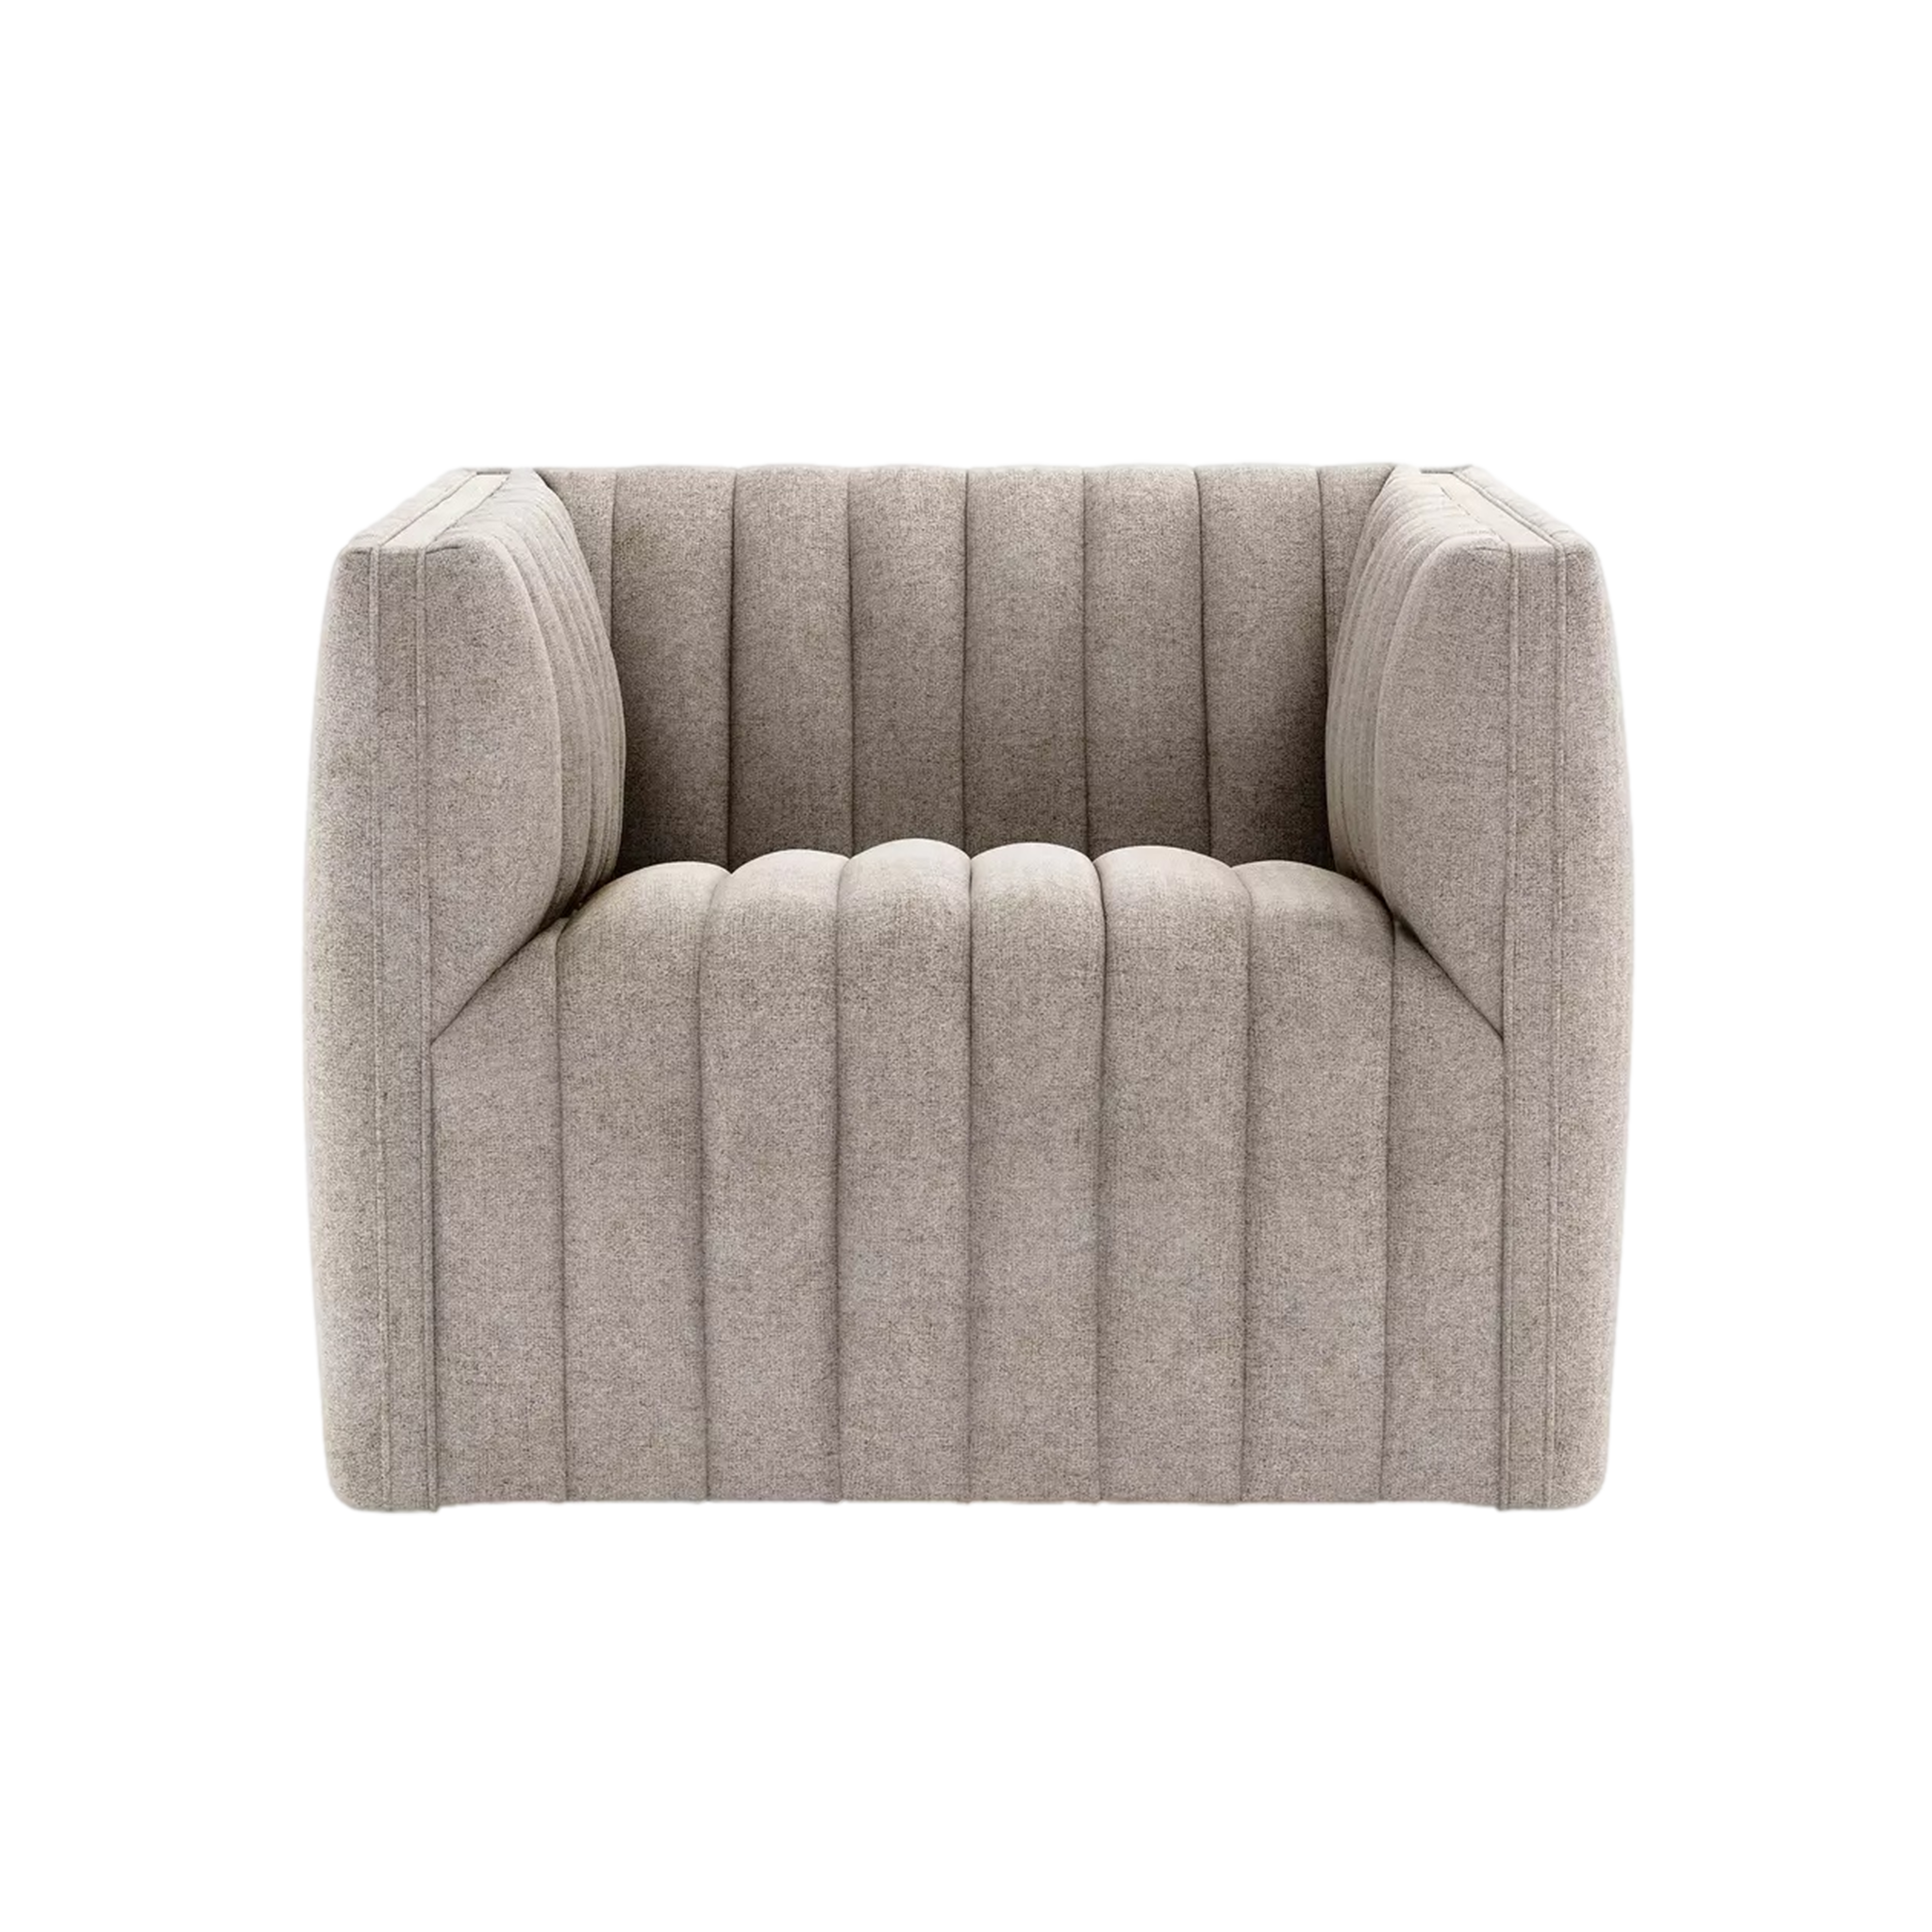 Neely Swivel Chair | Natural